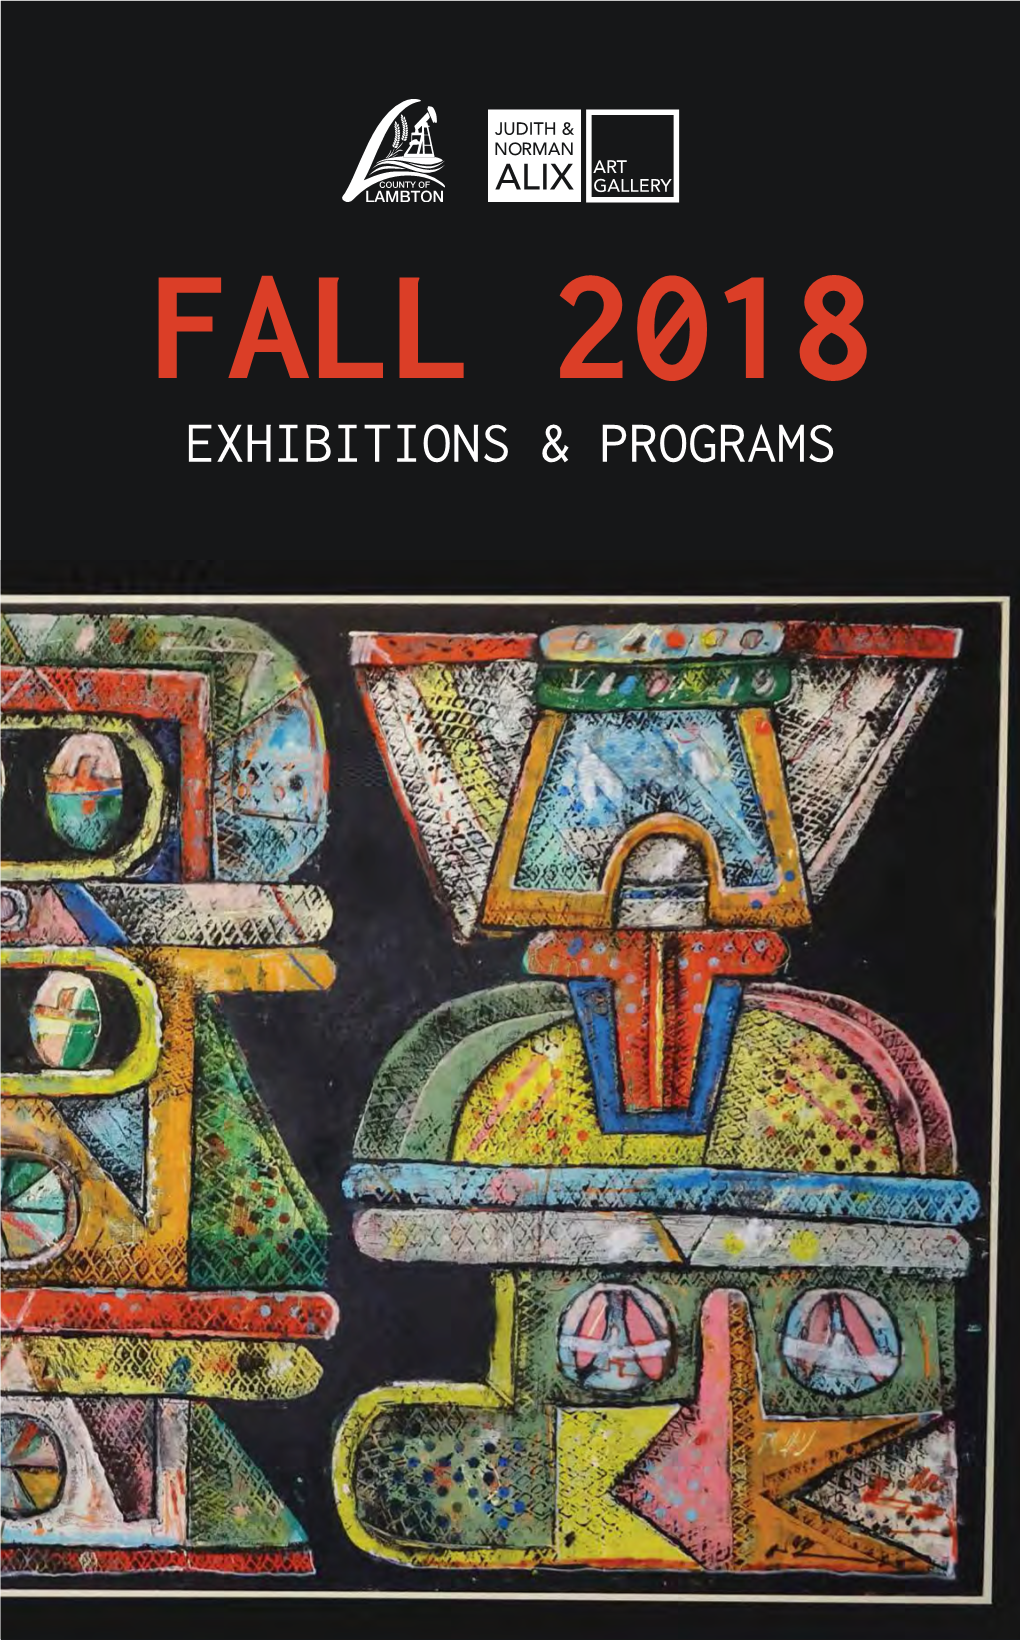 FALL 2018 EXHIBITIONS & PROGRAMS Table of Contents